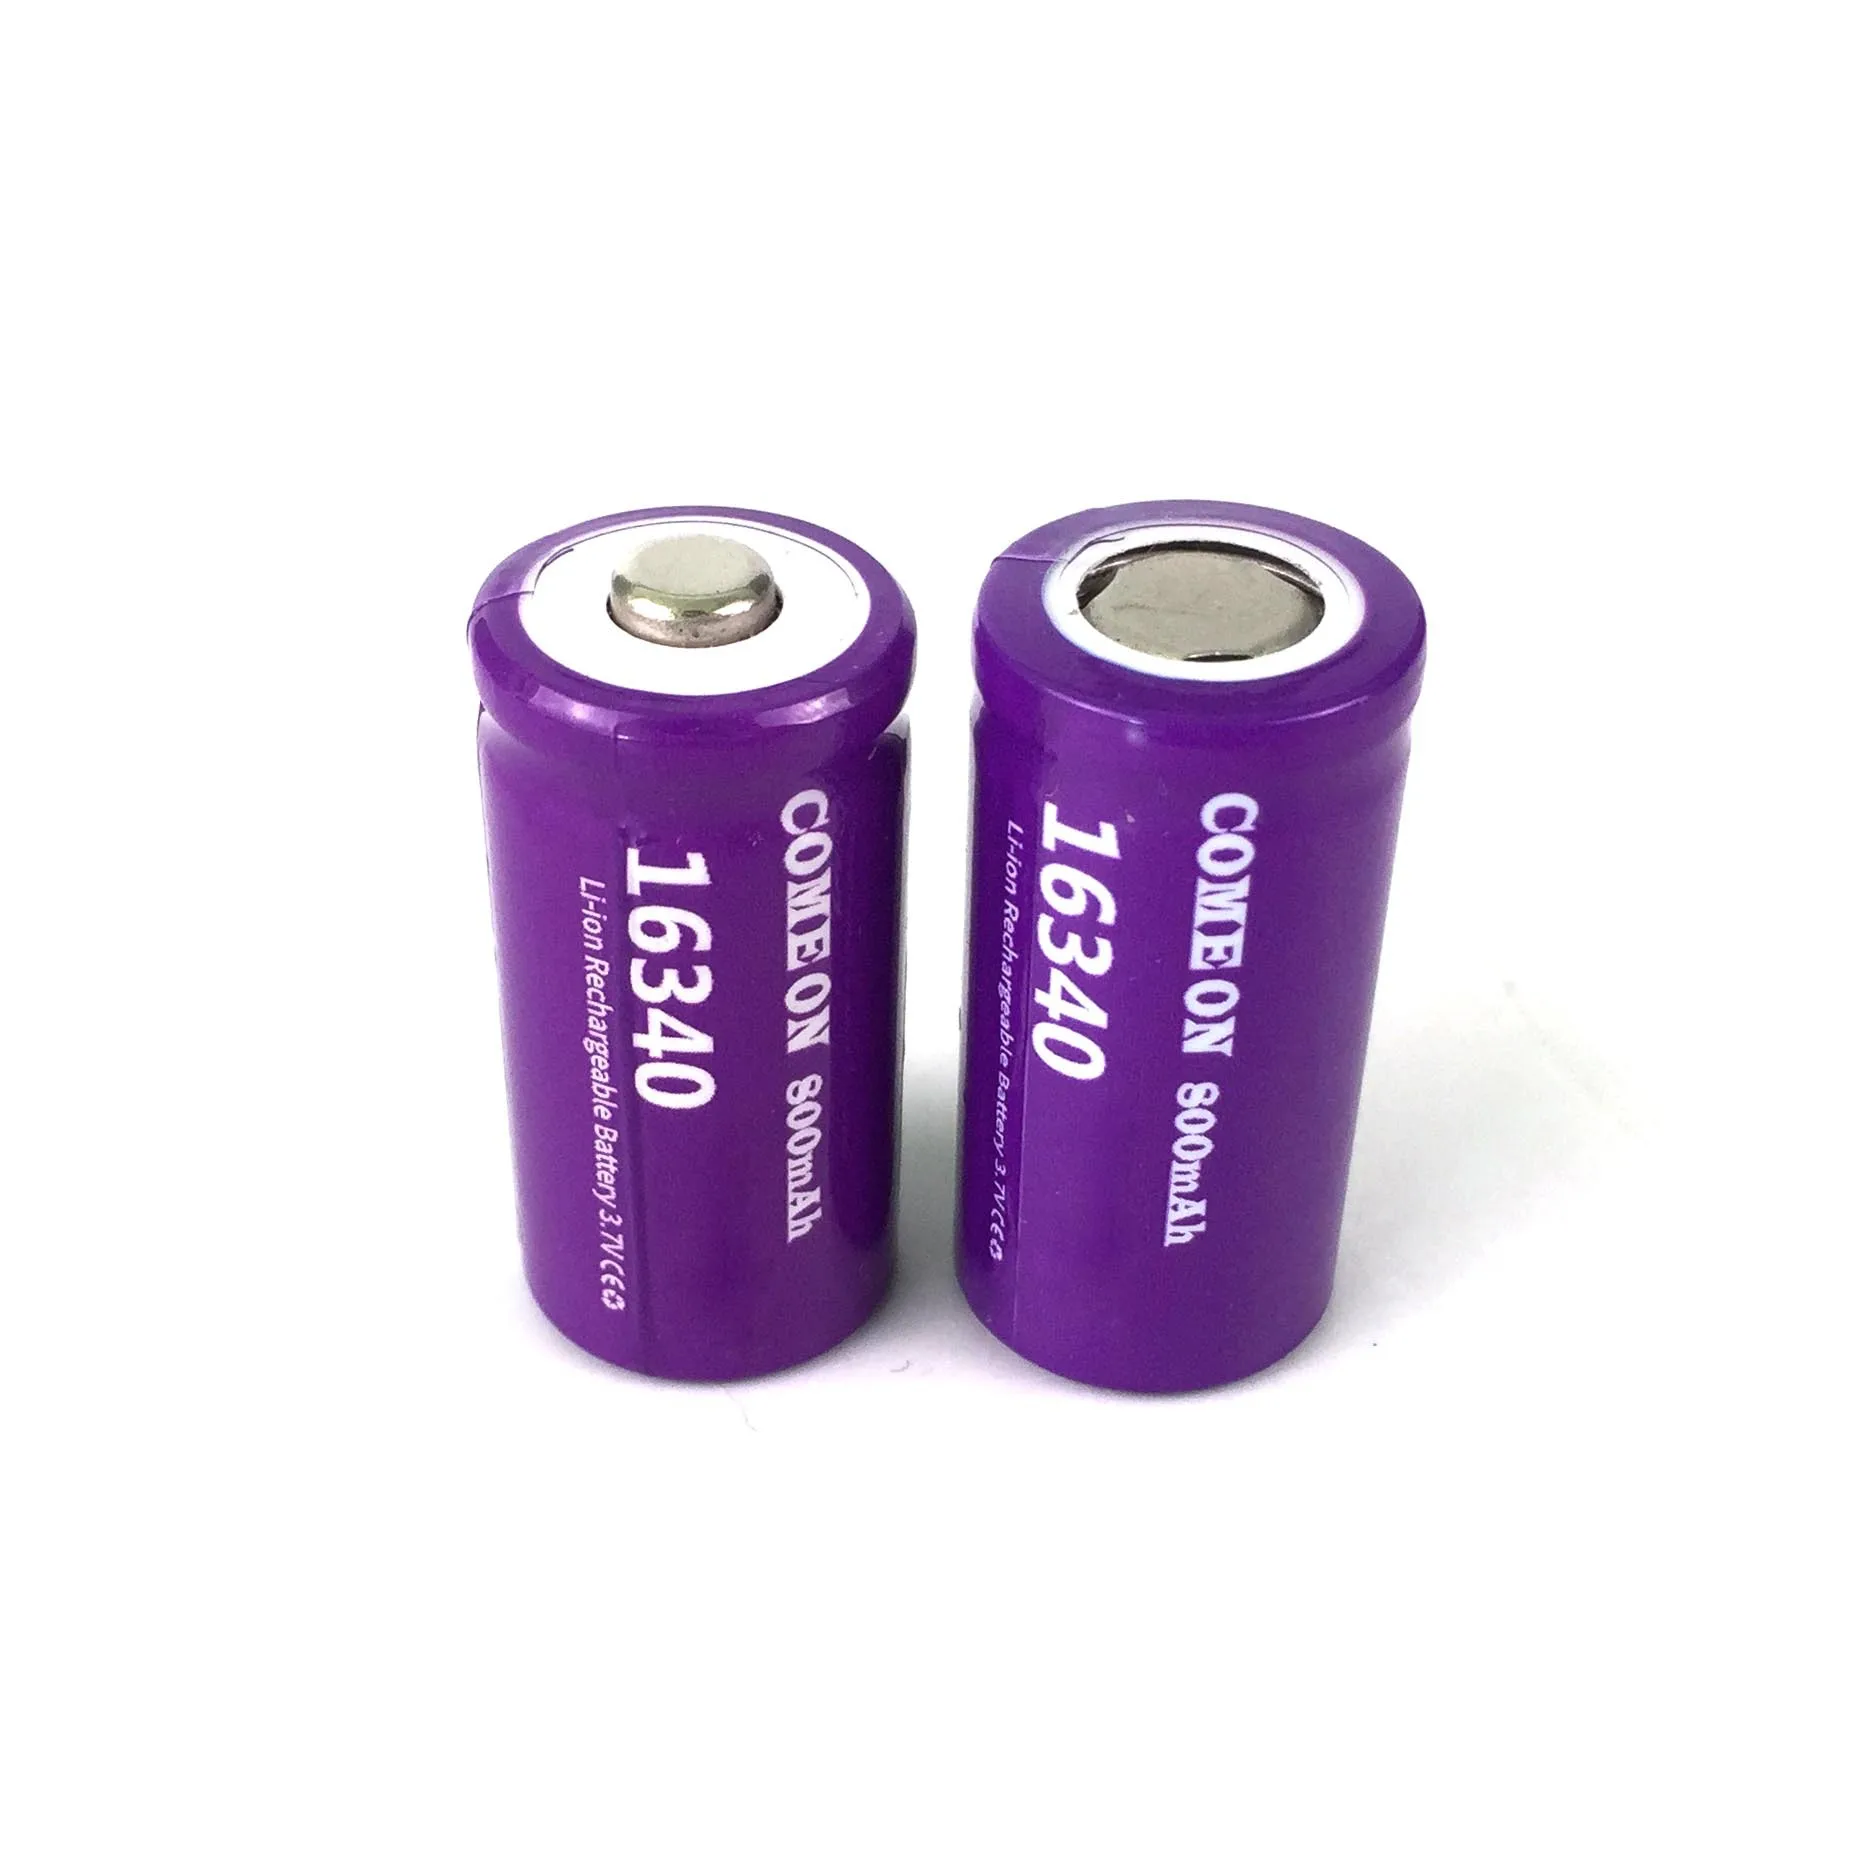 

Co Purple 800mah 16340 Lithium Battery 3.7V Electric Toothbrush Rechargeable Power Torch Battery